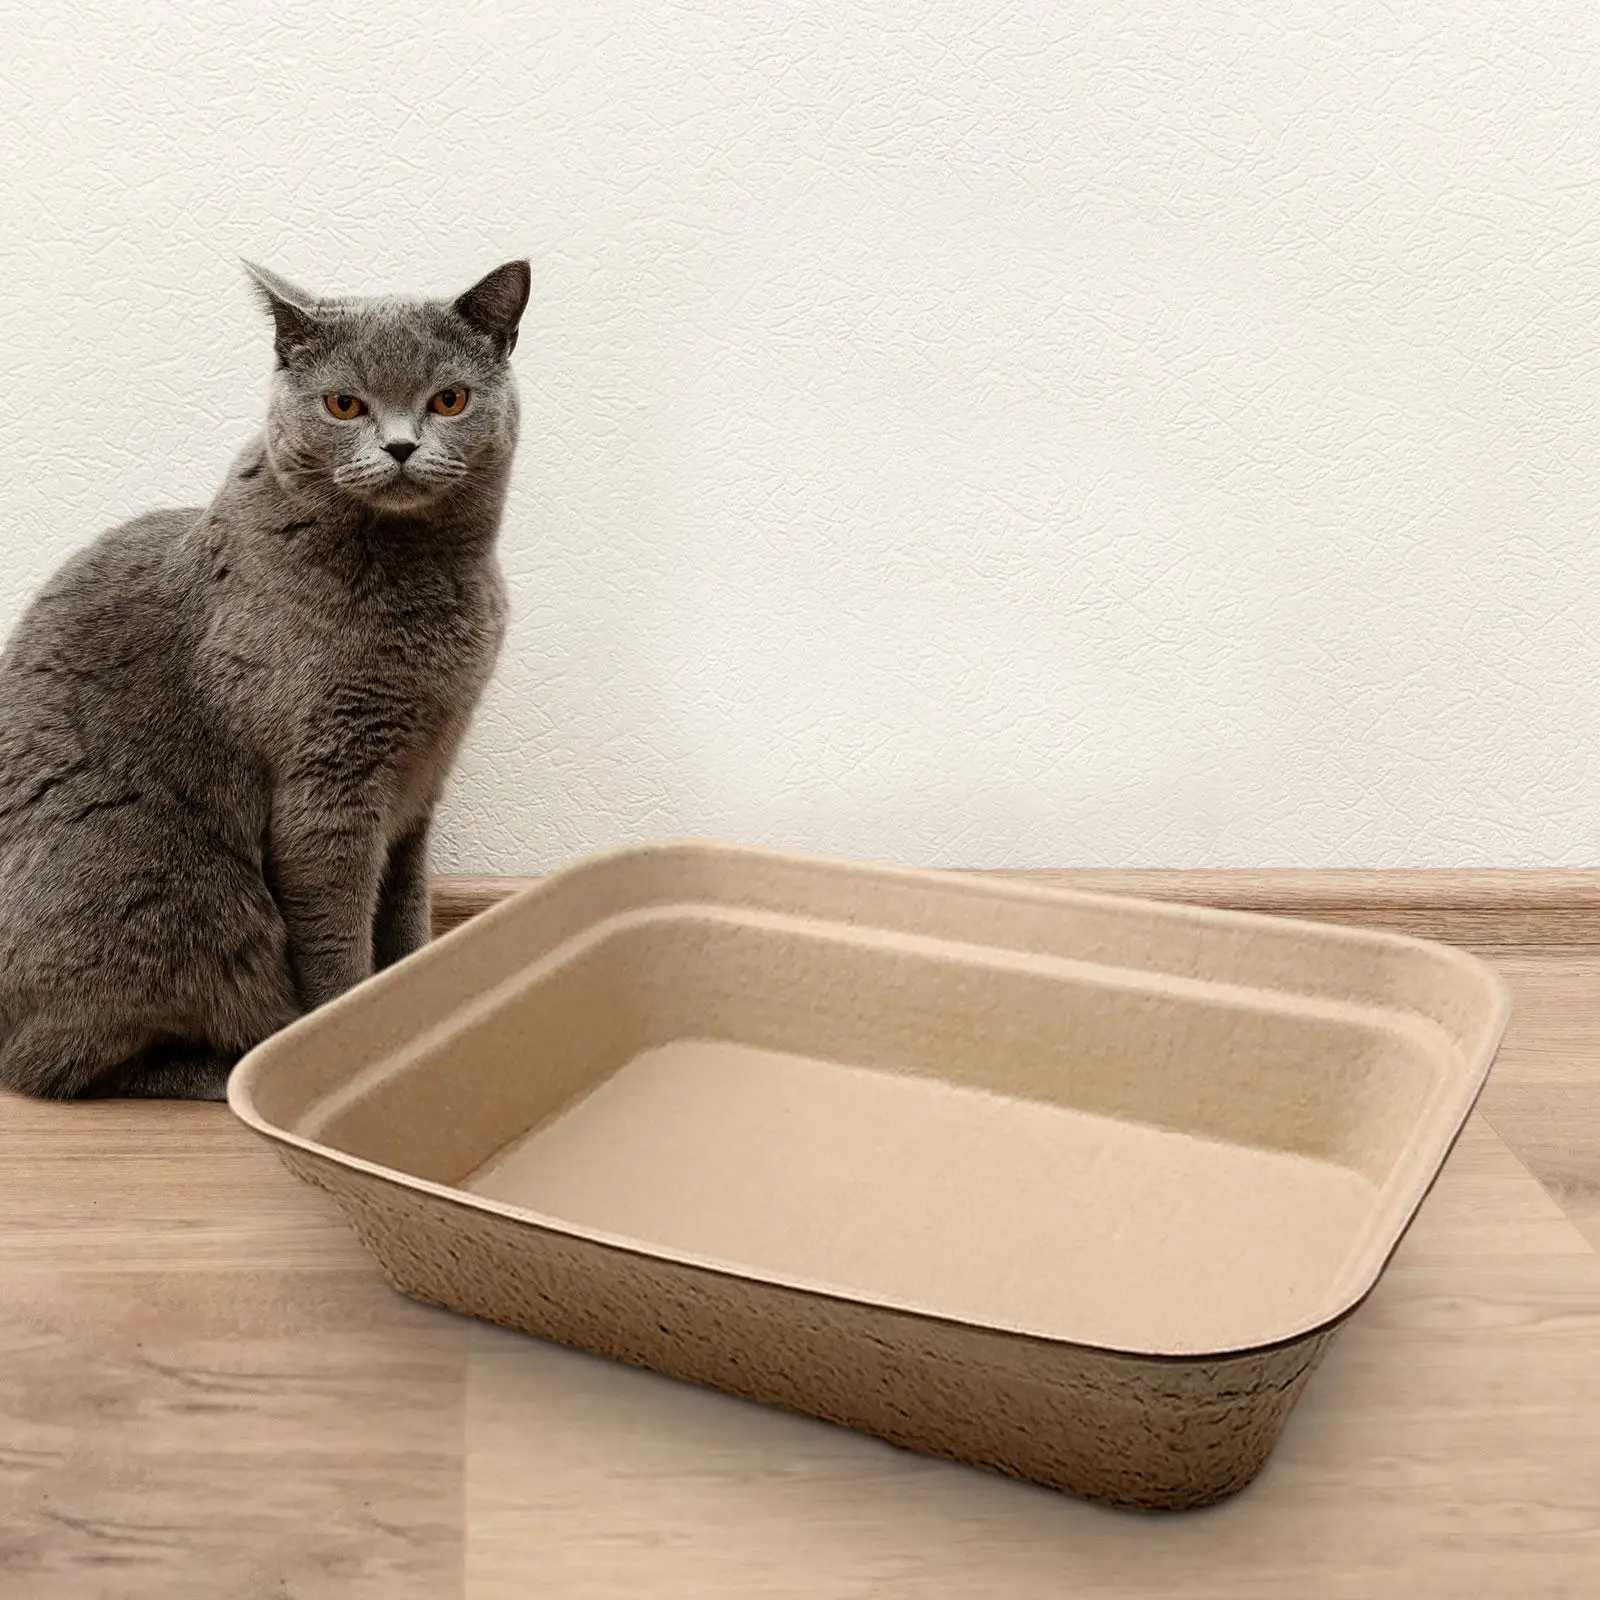 Disposable Cat Litter Boxes Kitty Travel Toilet Large Capacity Kitten Litter Pan Cats Litter Boxes Tray for Small Animals Bunny